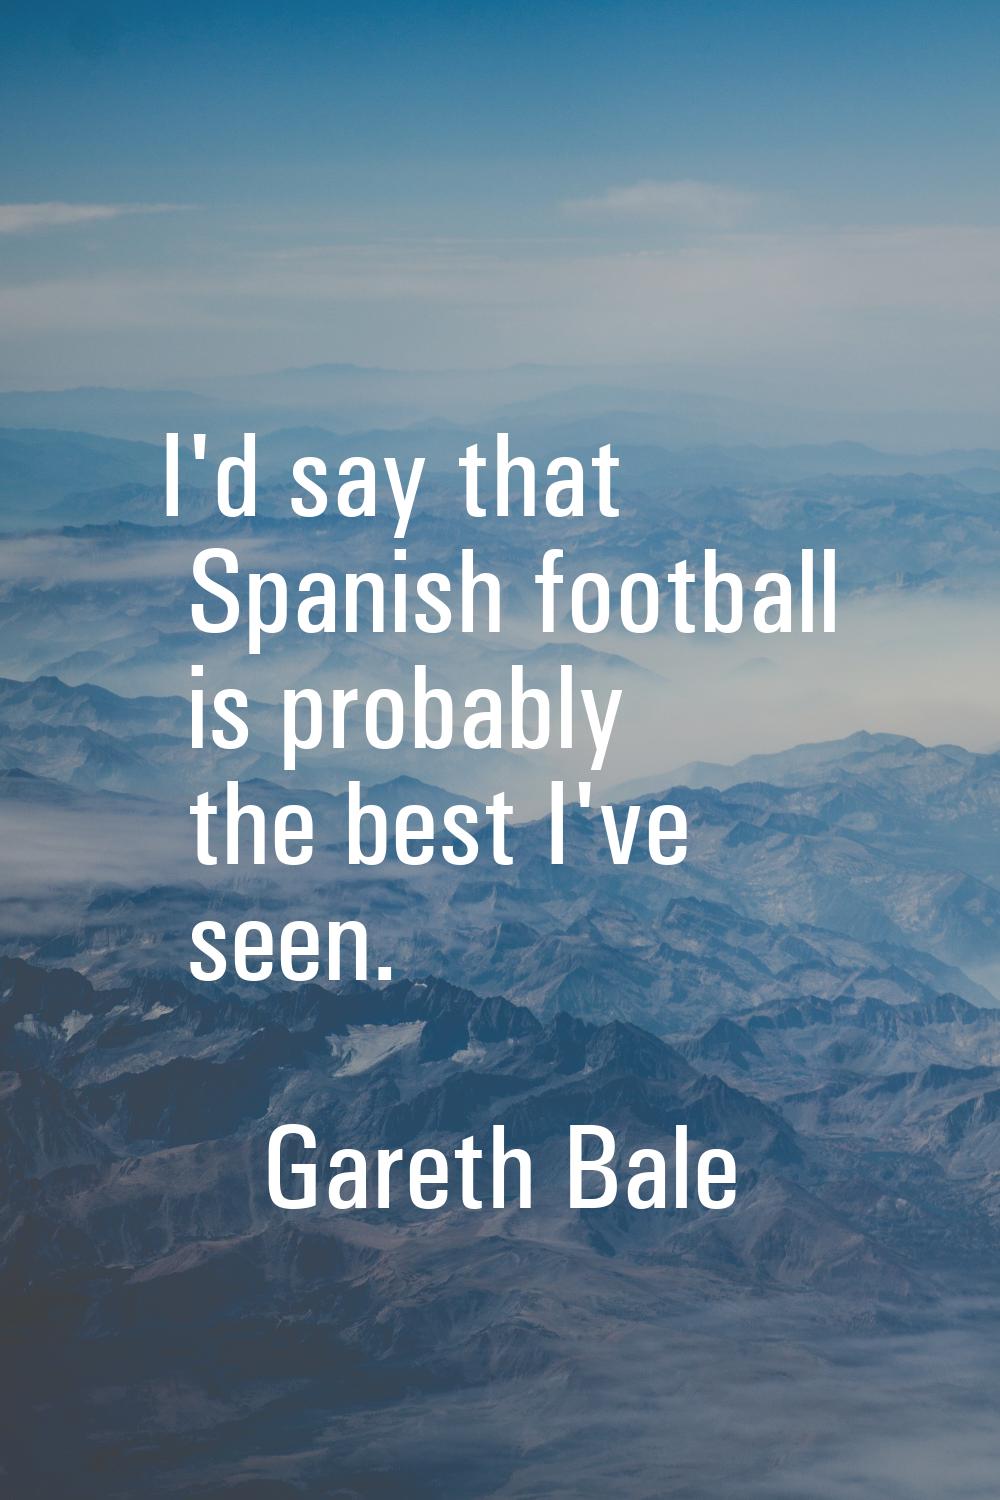 I'd say that Spanish football is probably the best I've seen.